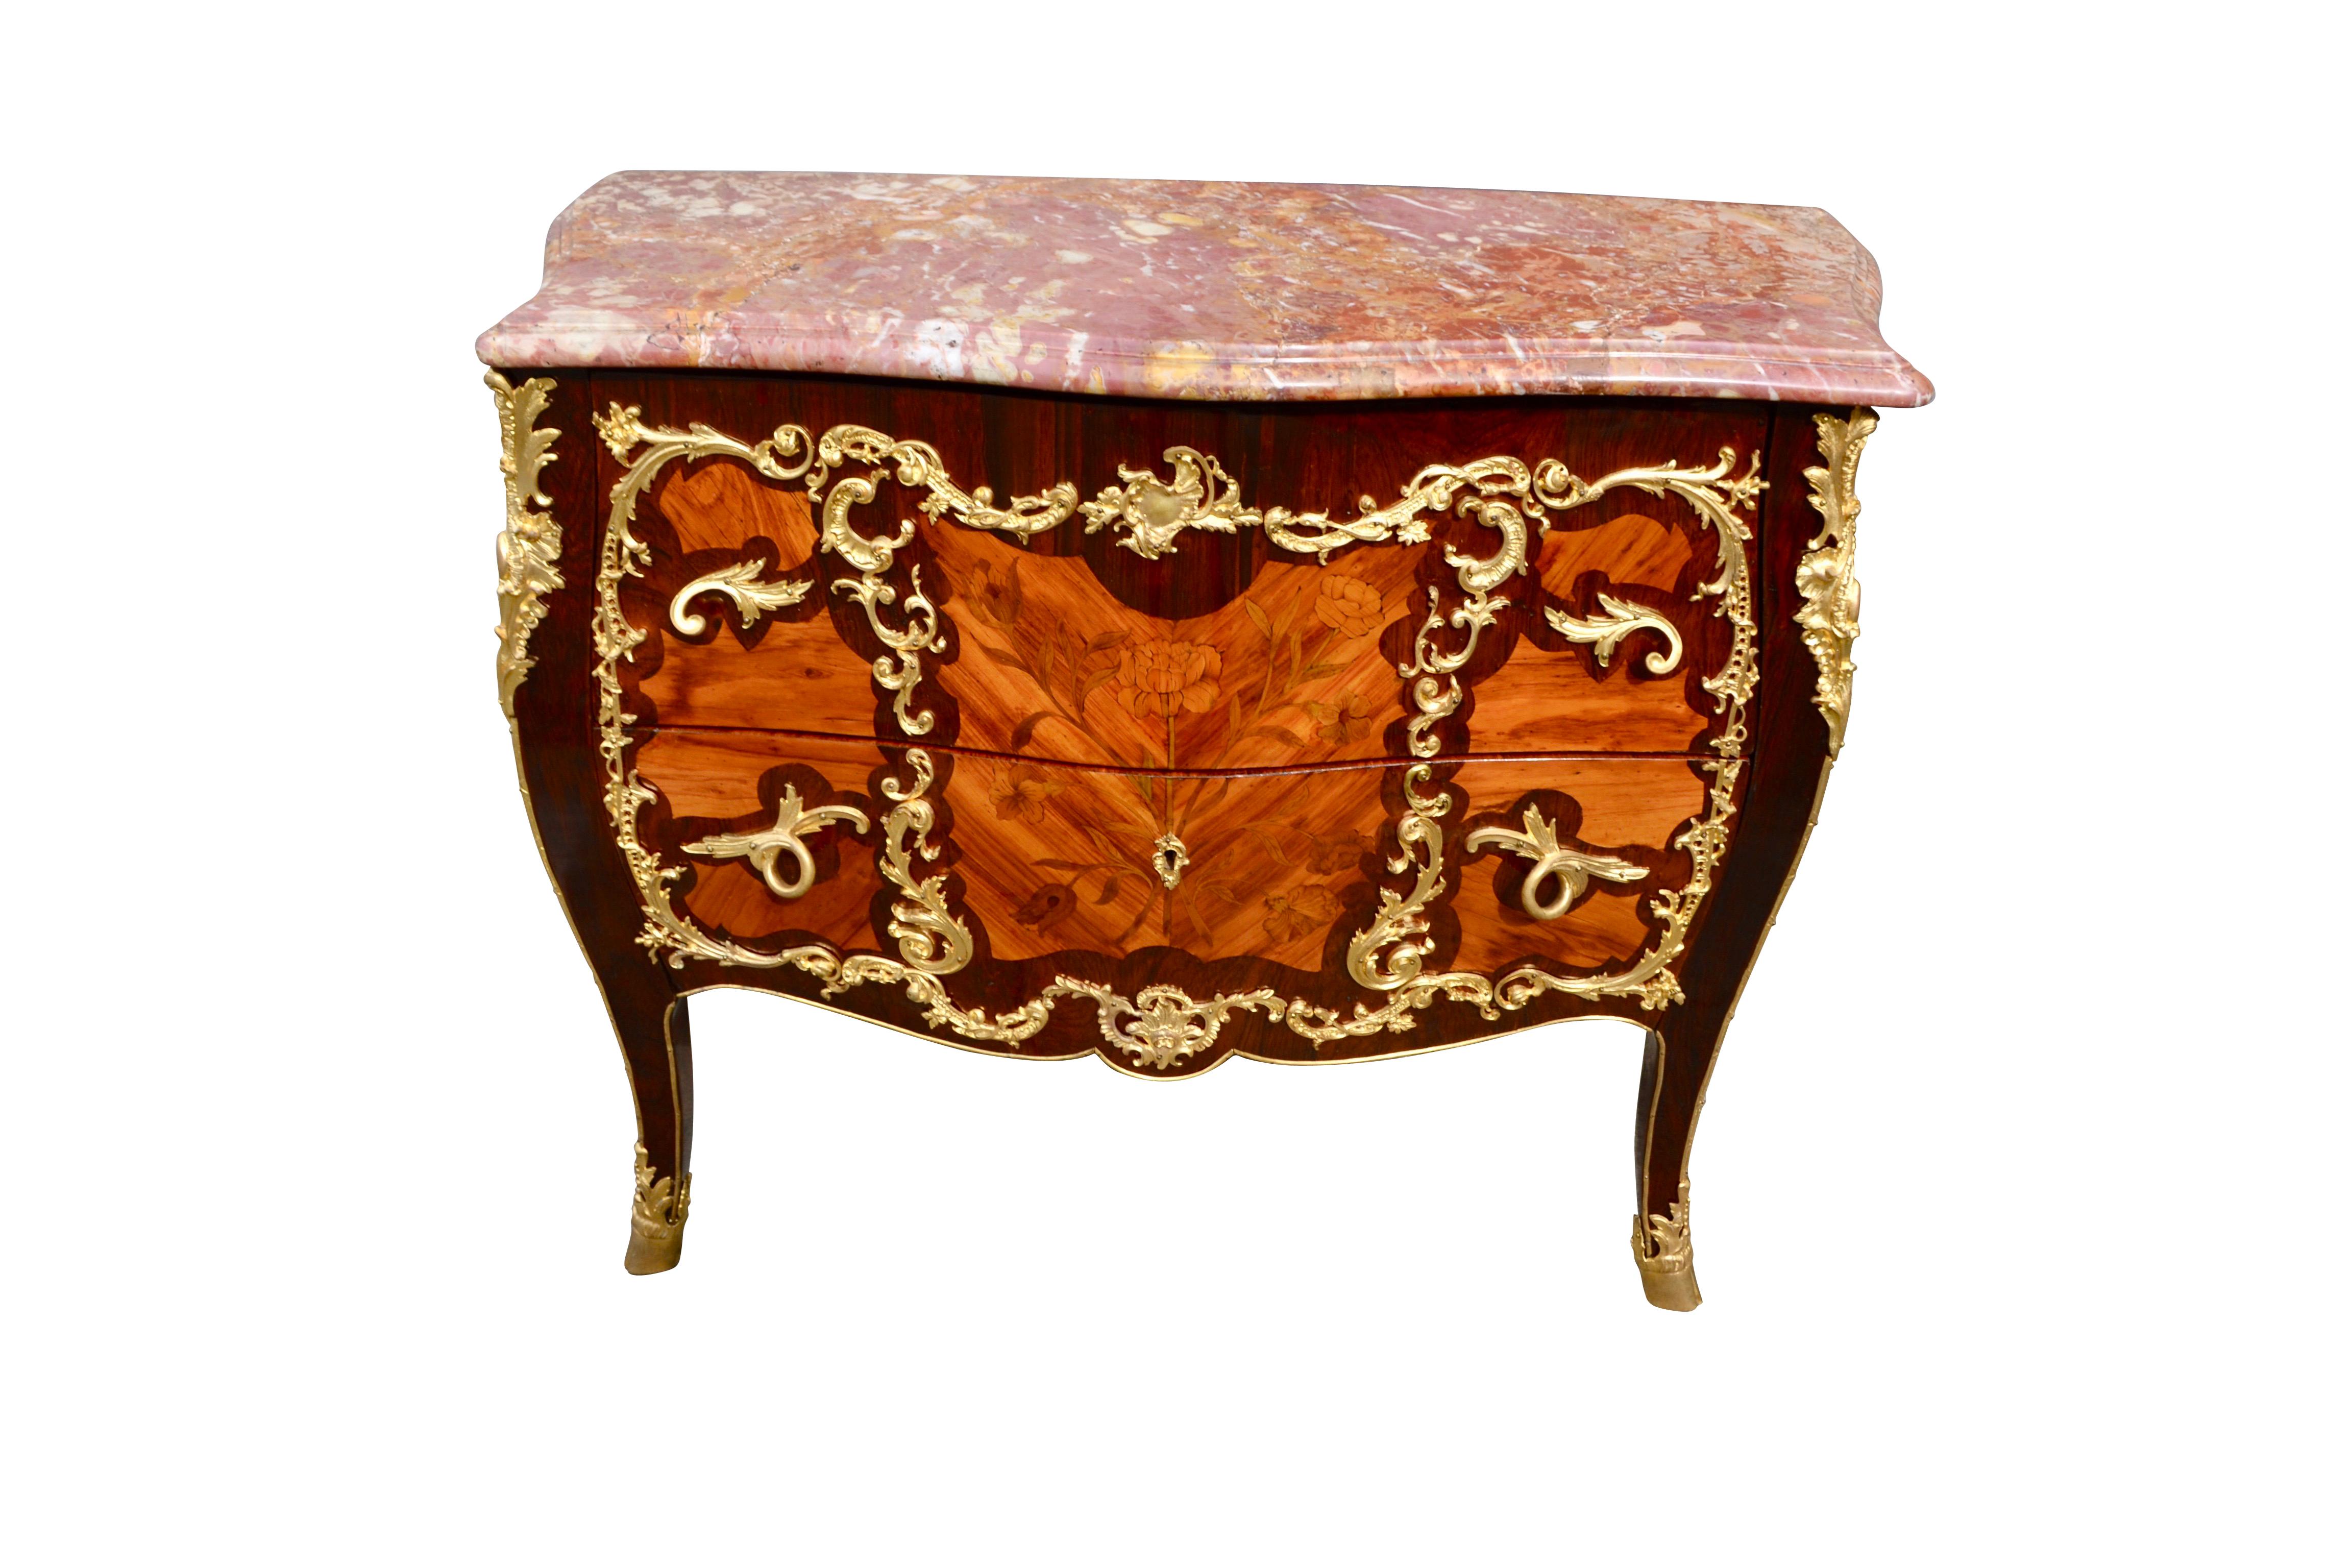 Hand-Crafted 19th Century French Louis XV Style Marquetry and Ormolu Bombe Chest of Drawers For Sale